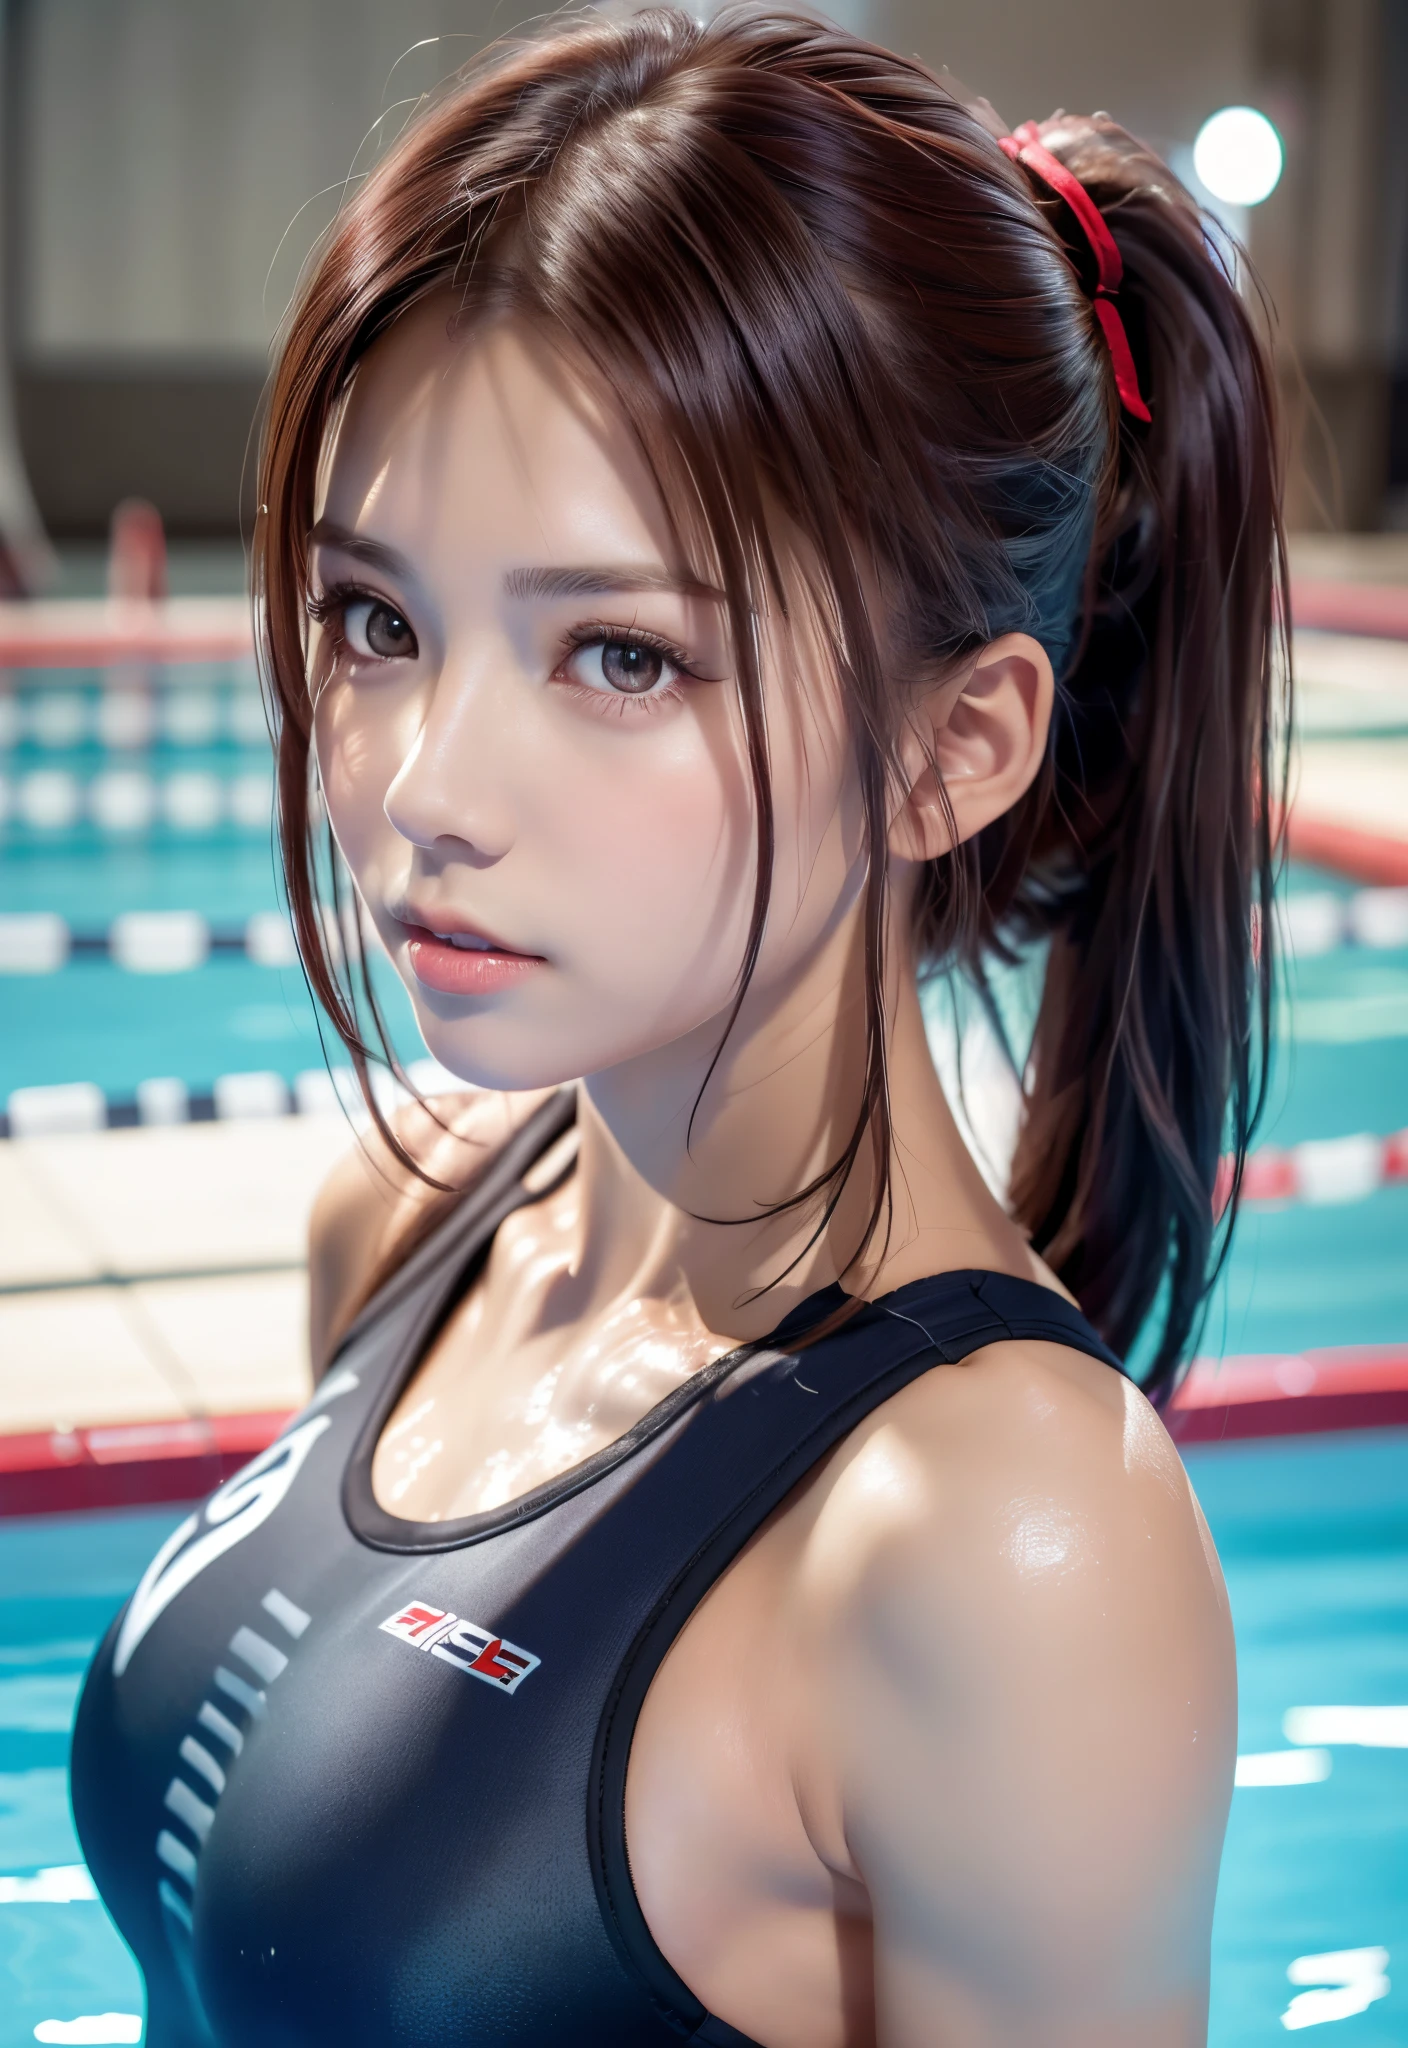 8K, of the highest quality, masutepiece:1.2), (Realistic, Photorealsitic:1.3), of the highest quality, masutepiece, Beautiful young woman, Pensive expression, Thoughtful look, Competitive swimmers、Competitive swimwear、Hair tied back, Cinematic background, Light skin tone